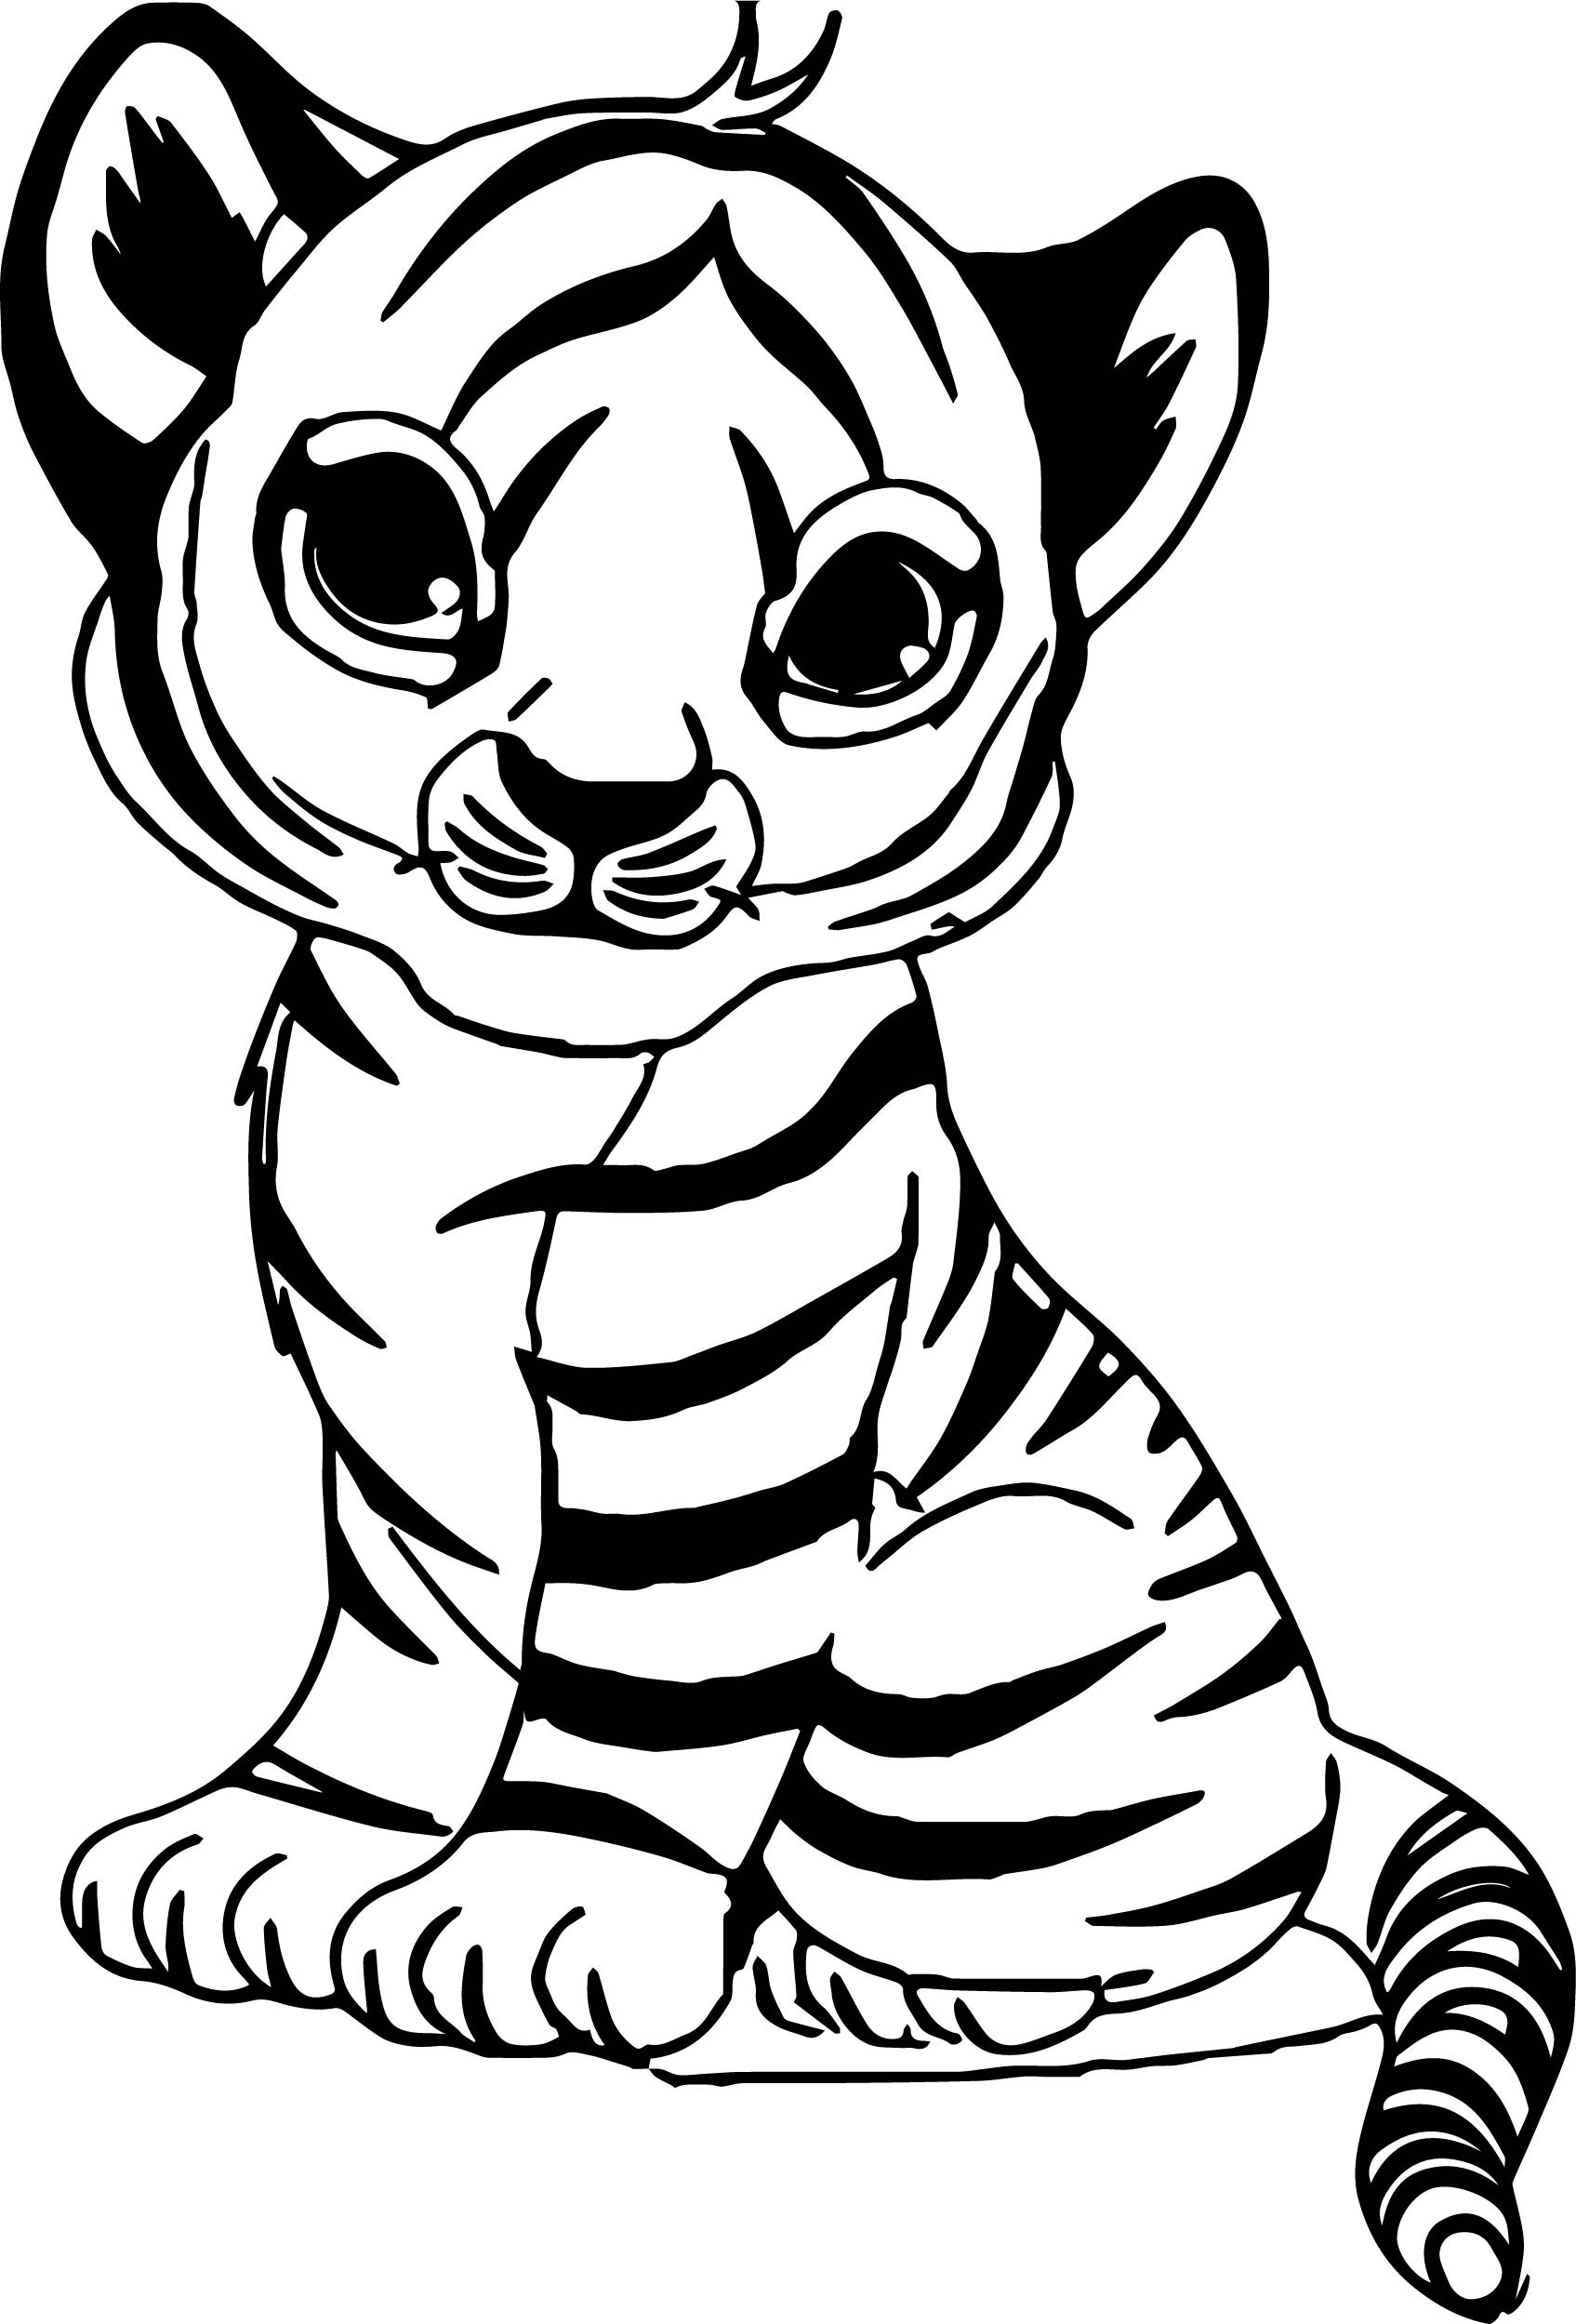 Cute Baby Tiger Coloring Pages
 Cute Baby Tiger Coloring Page